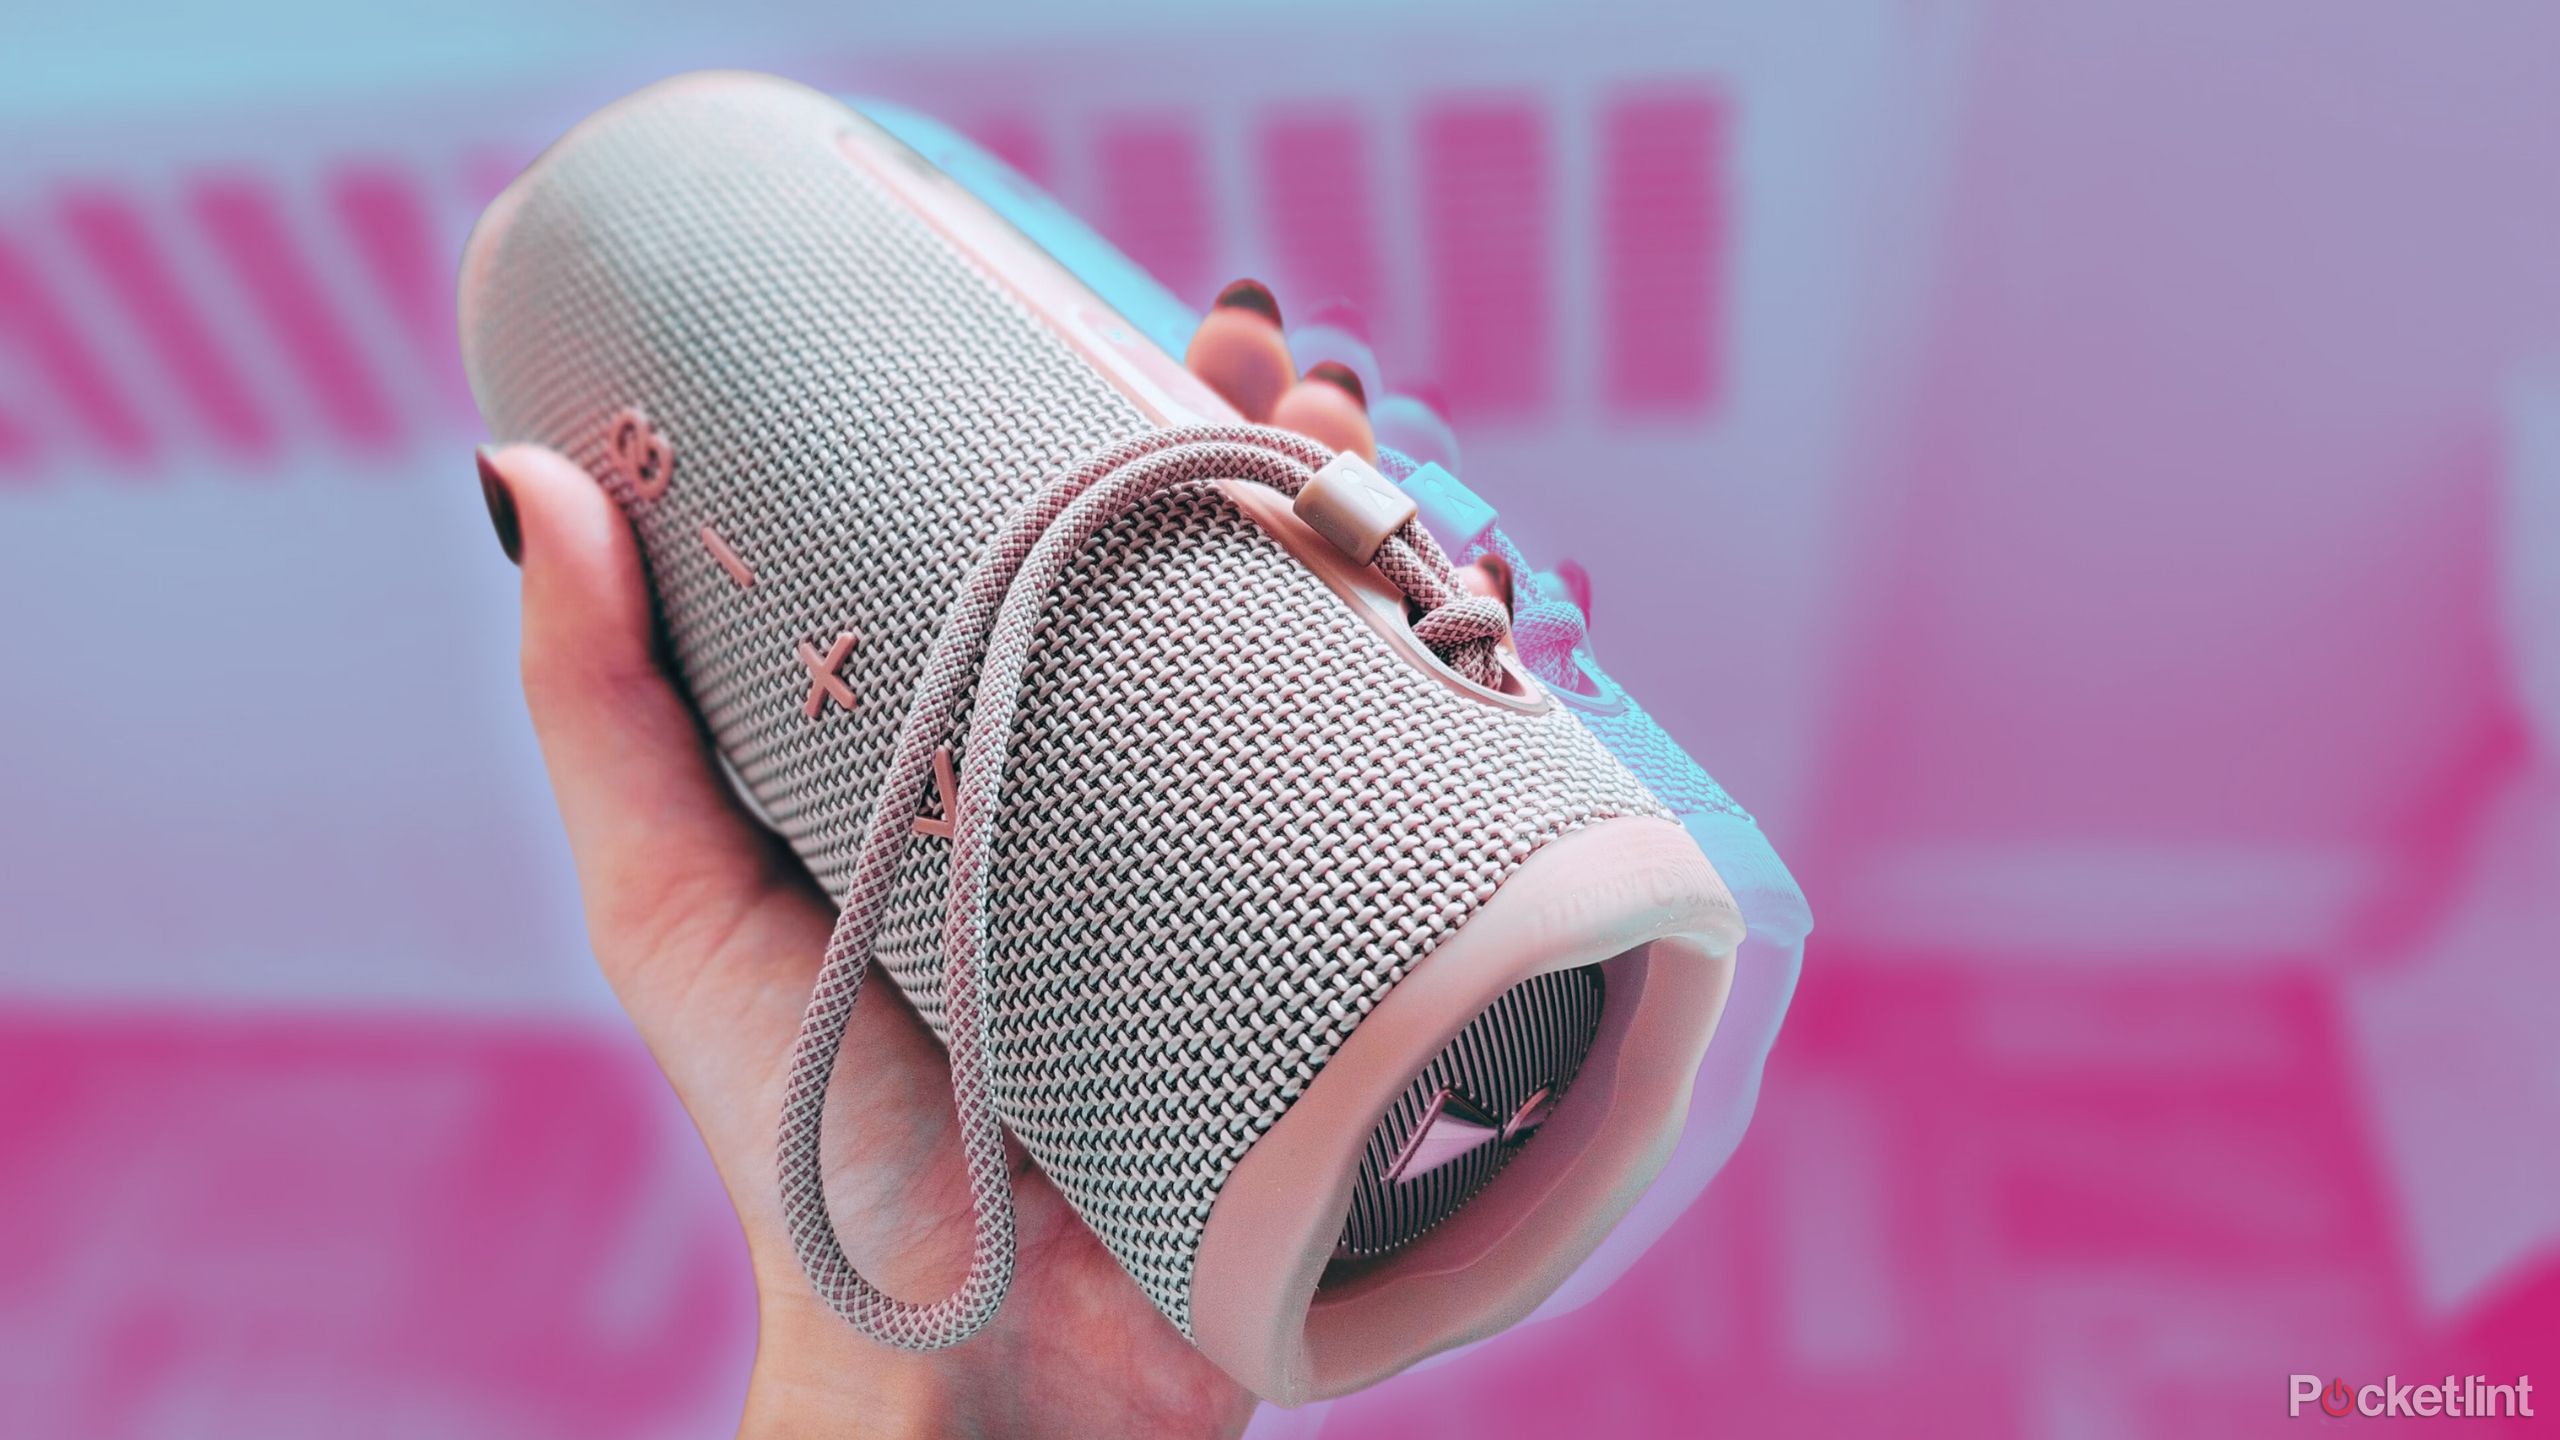 Pink JBL Flip 6 against a blue and pink background